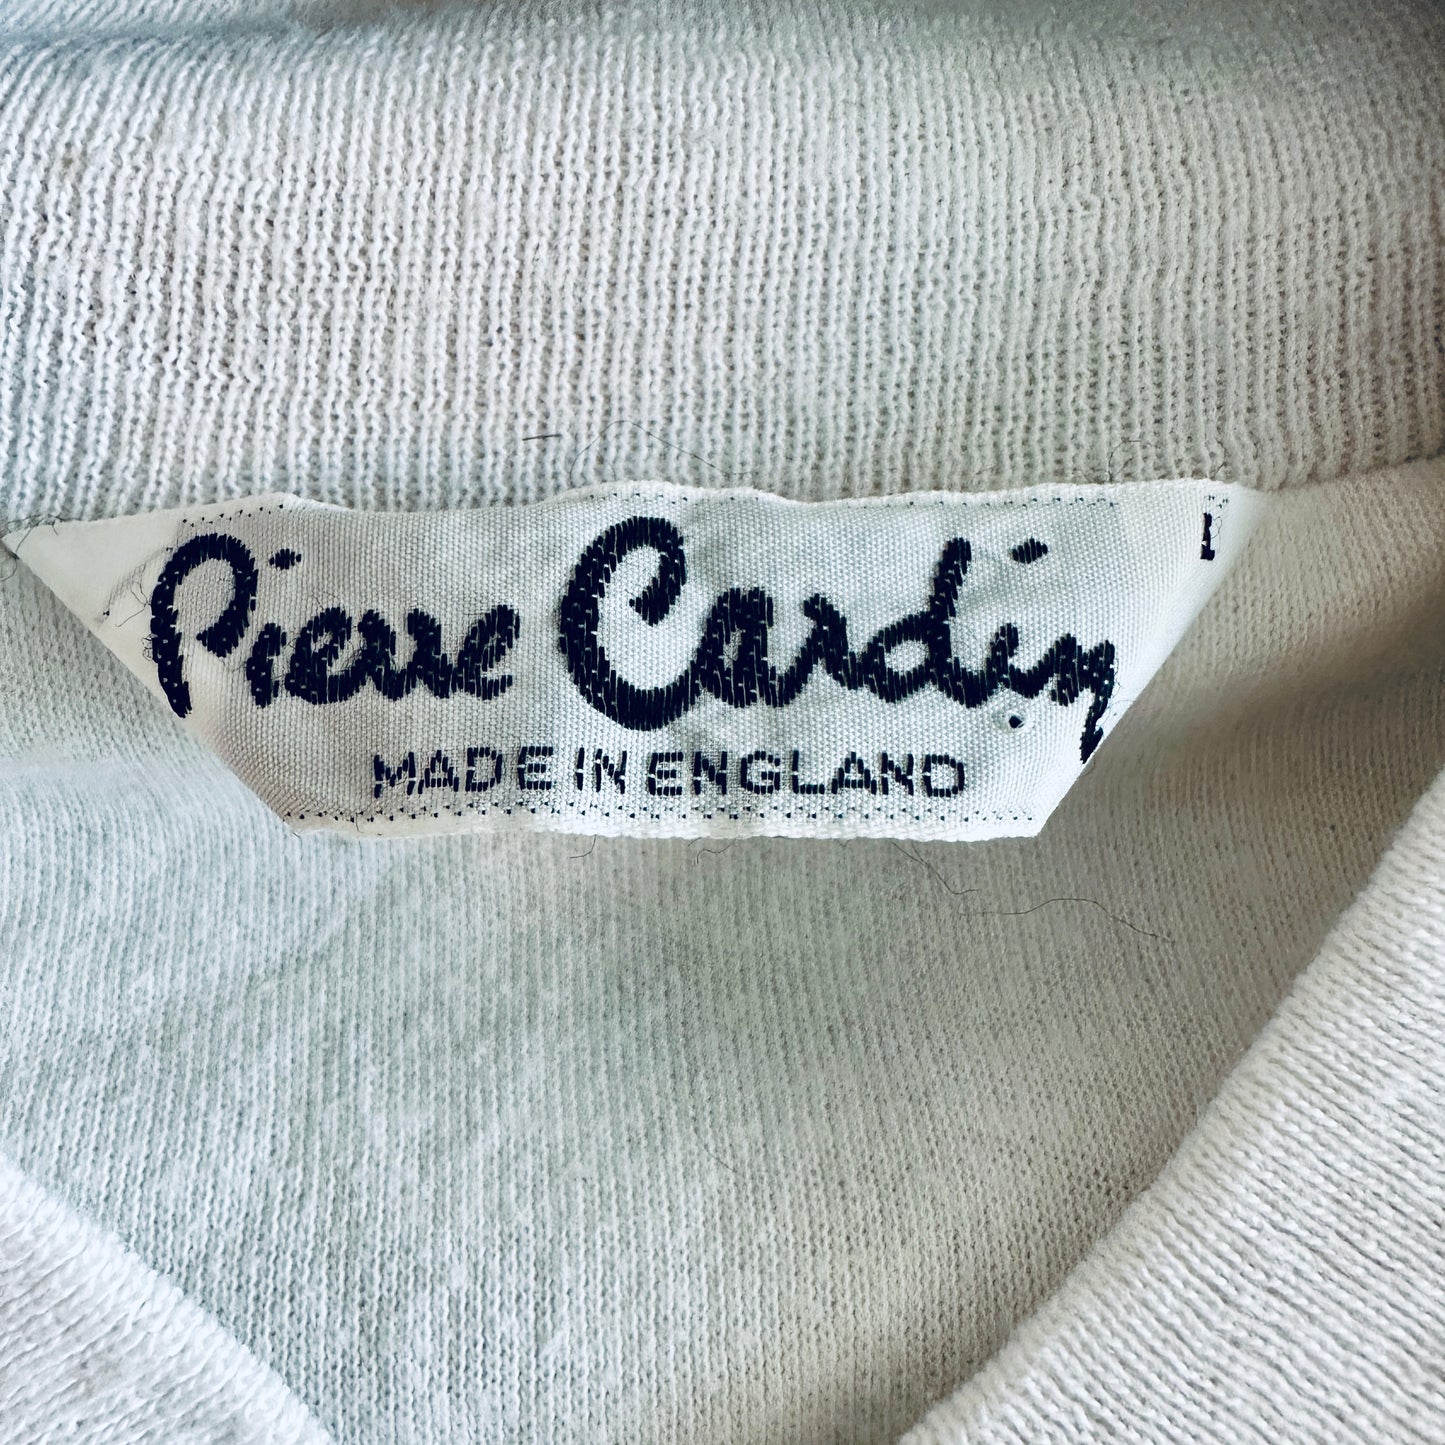 Pierre Cardin Vintage 80s Tennis Track Jacket - L - Made in England